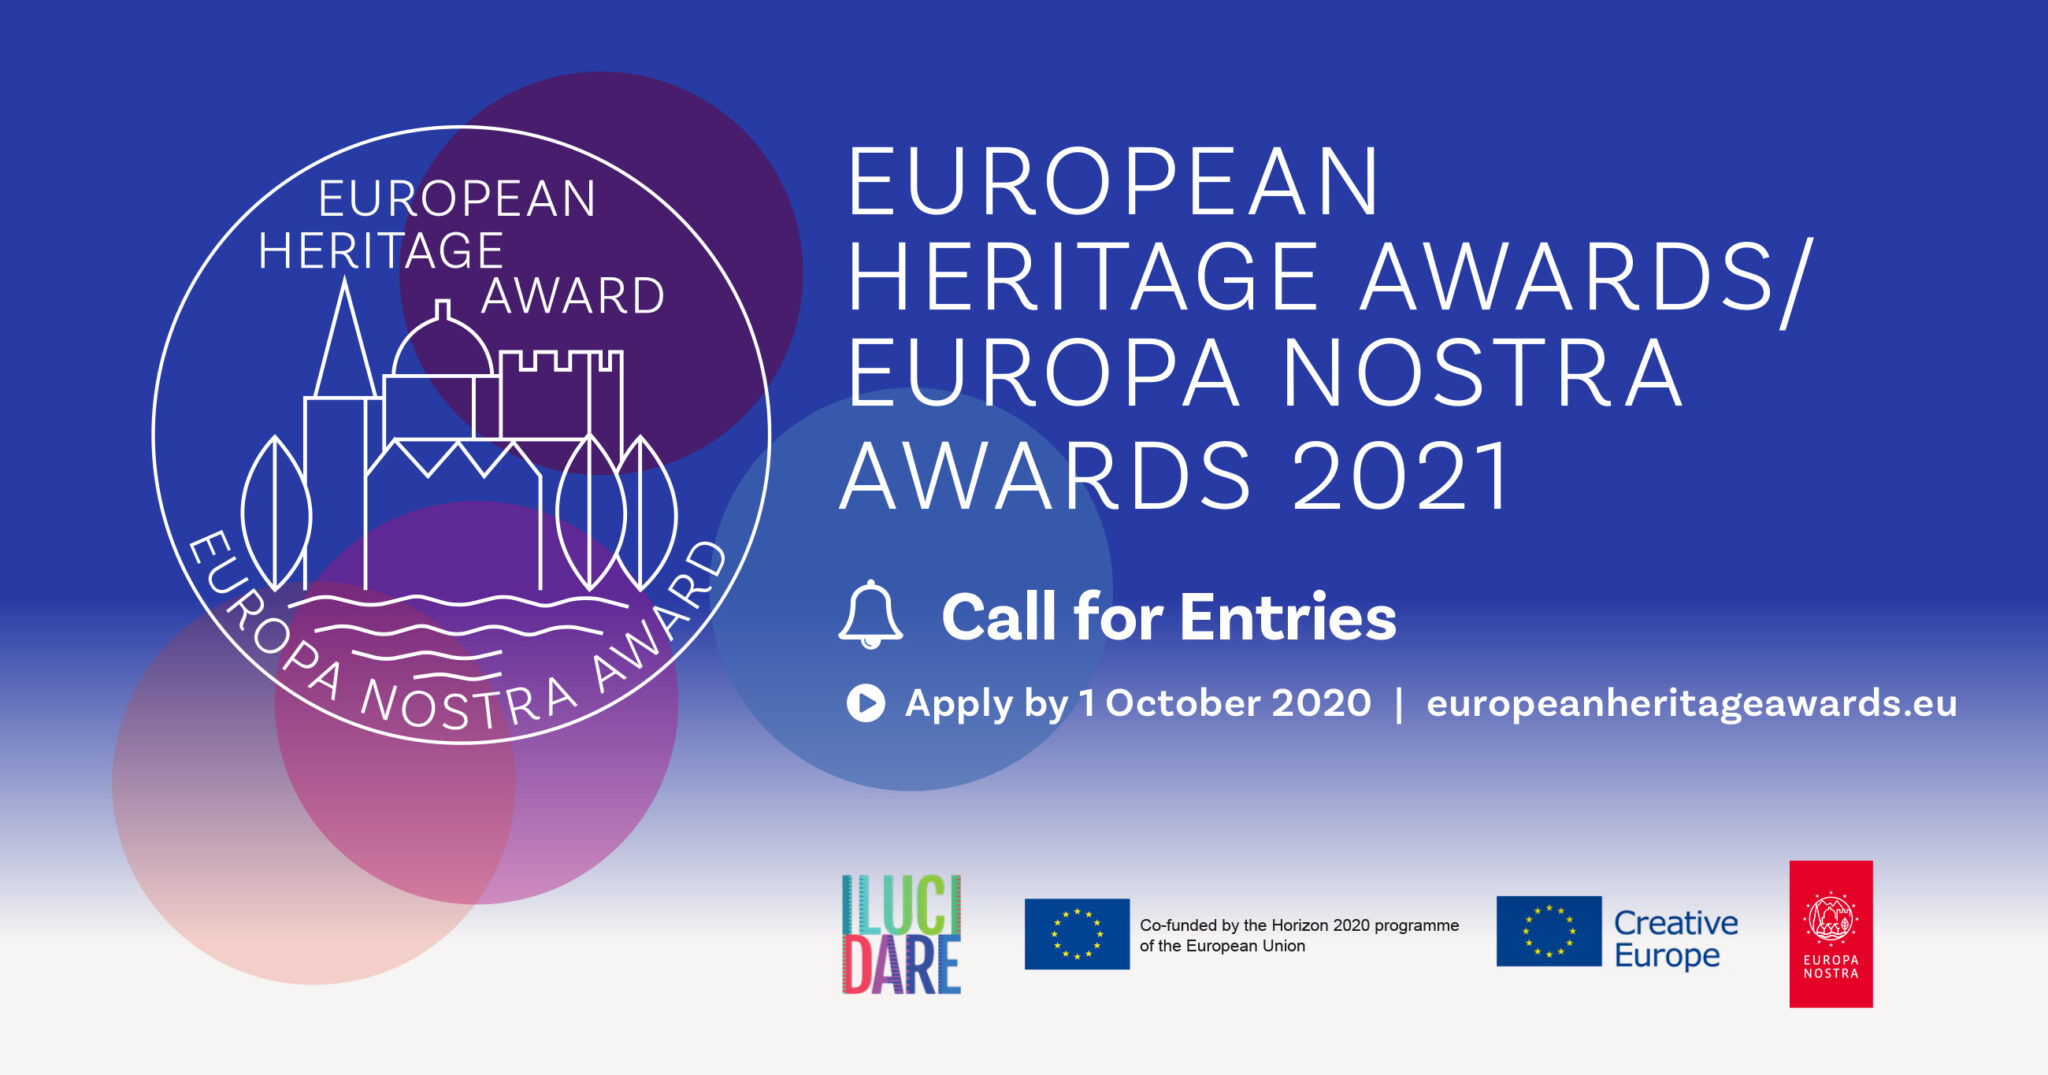 Open for submissions: European Heritage Awards / Europa Nostra Awards 2021